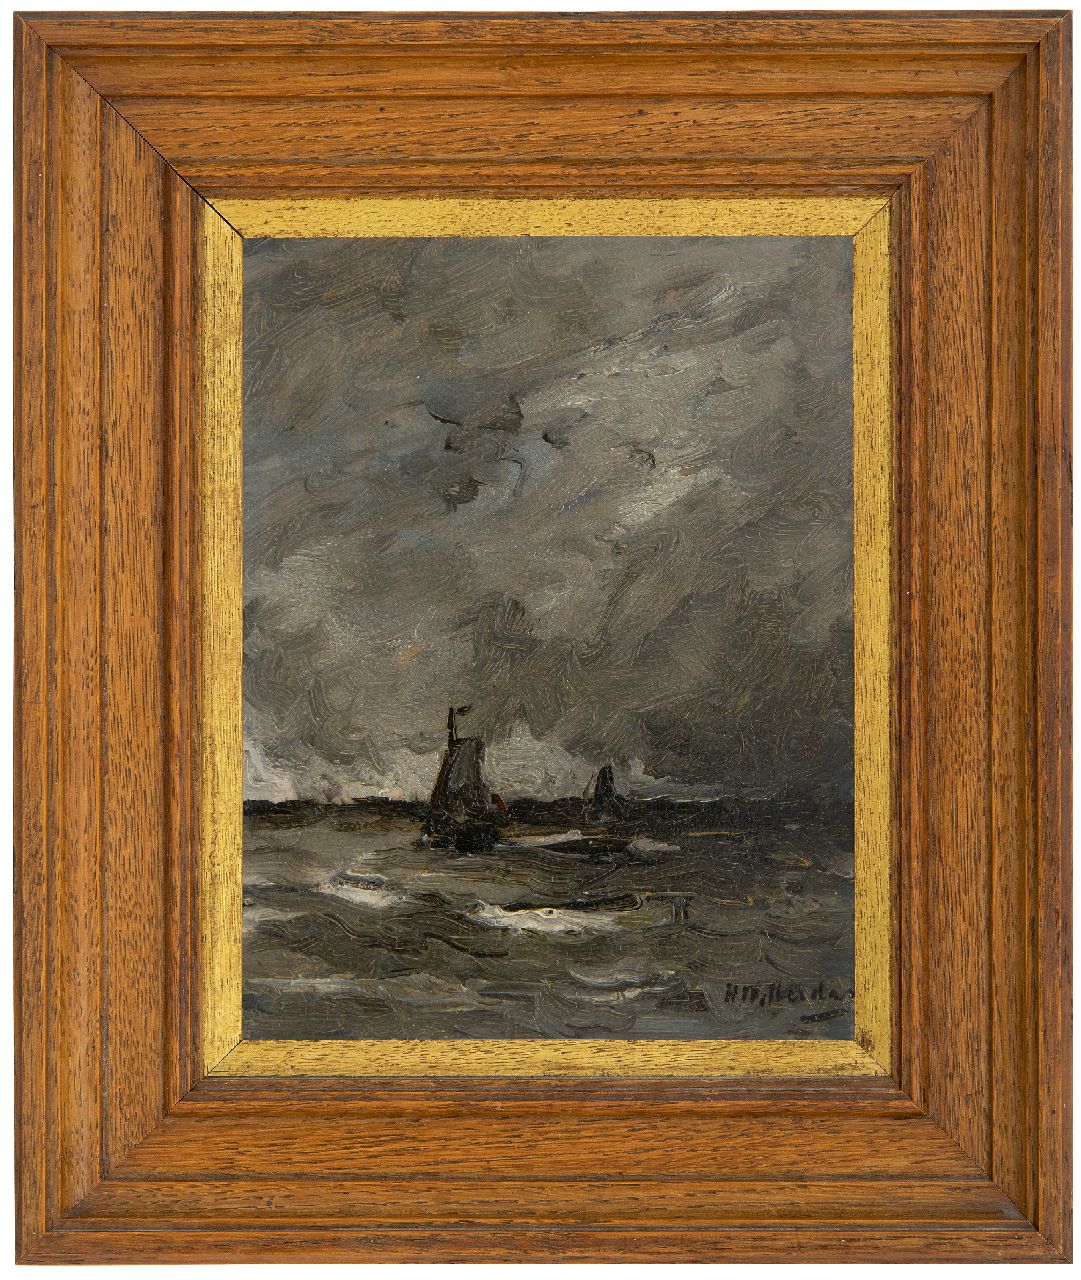 Mesdag H.W.  | Hendrik Willem Mesdag | Paintings offered for sale | Fishing ships in a storm, oil on panel 19.0 x 15.0 cm, signed l.r.